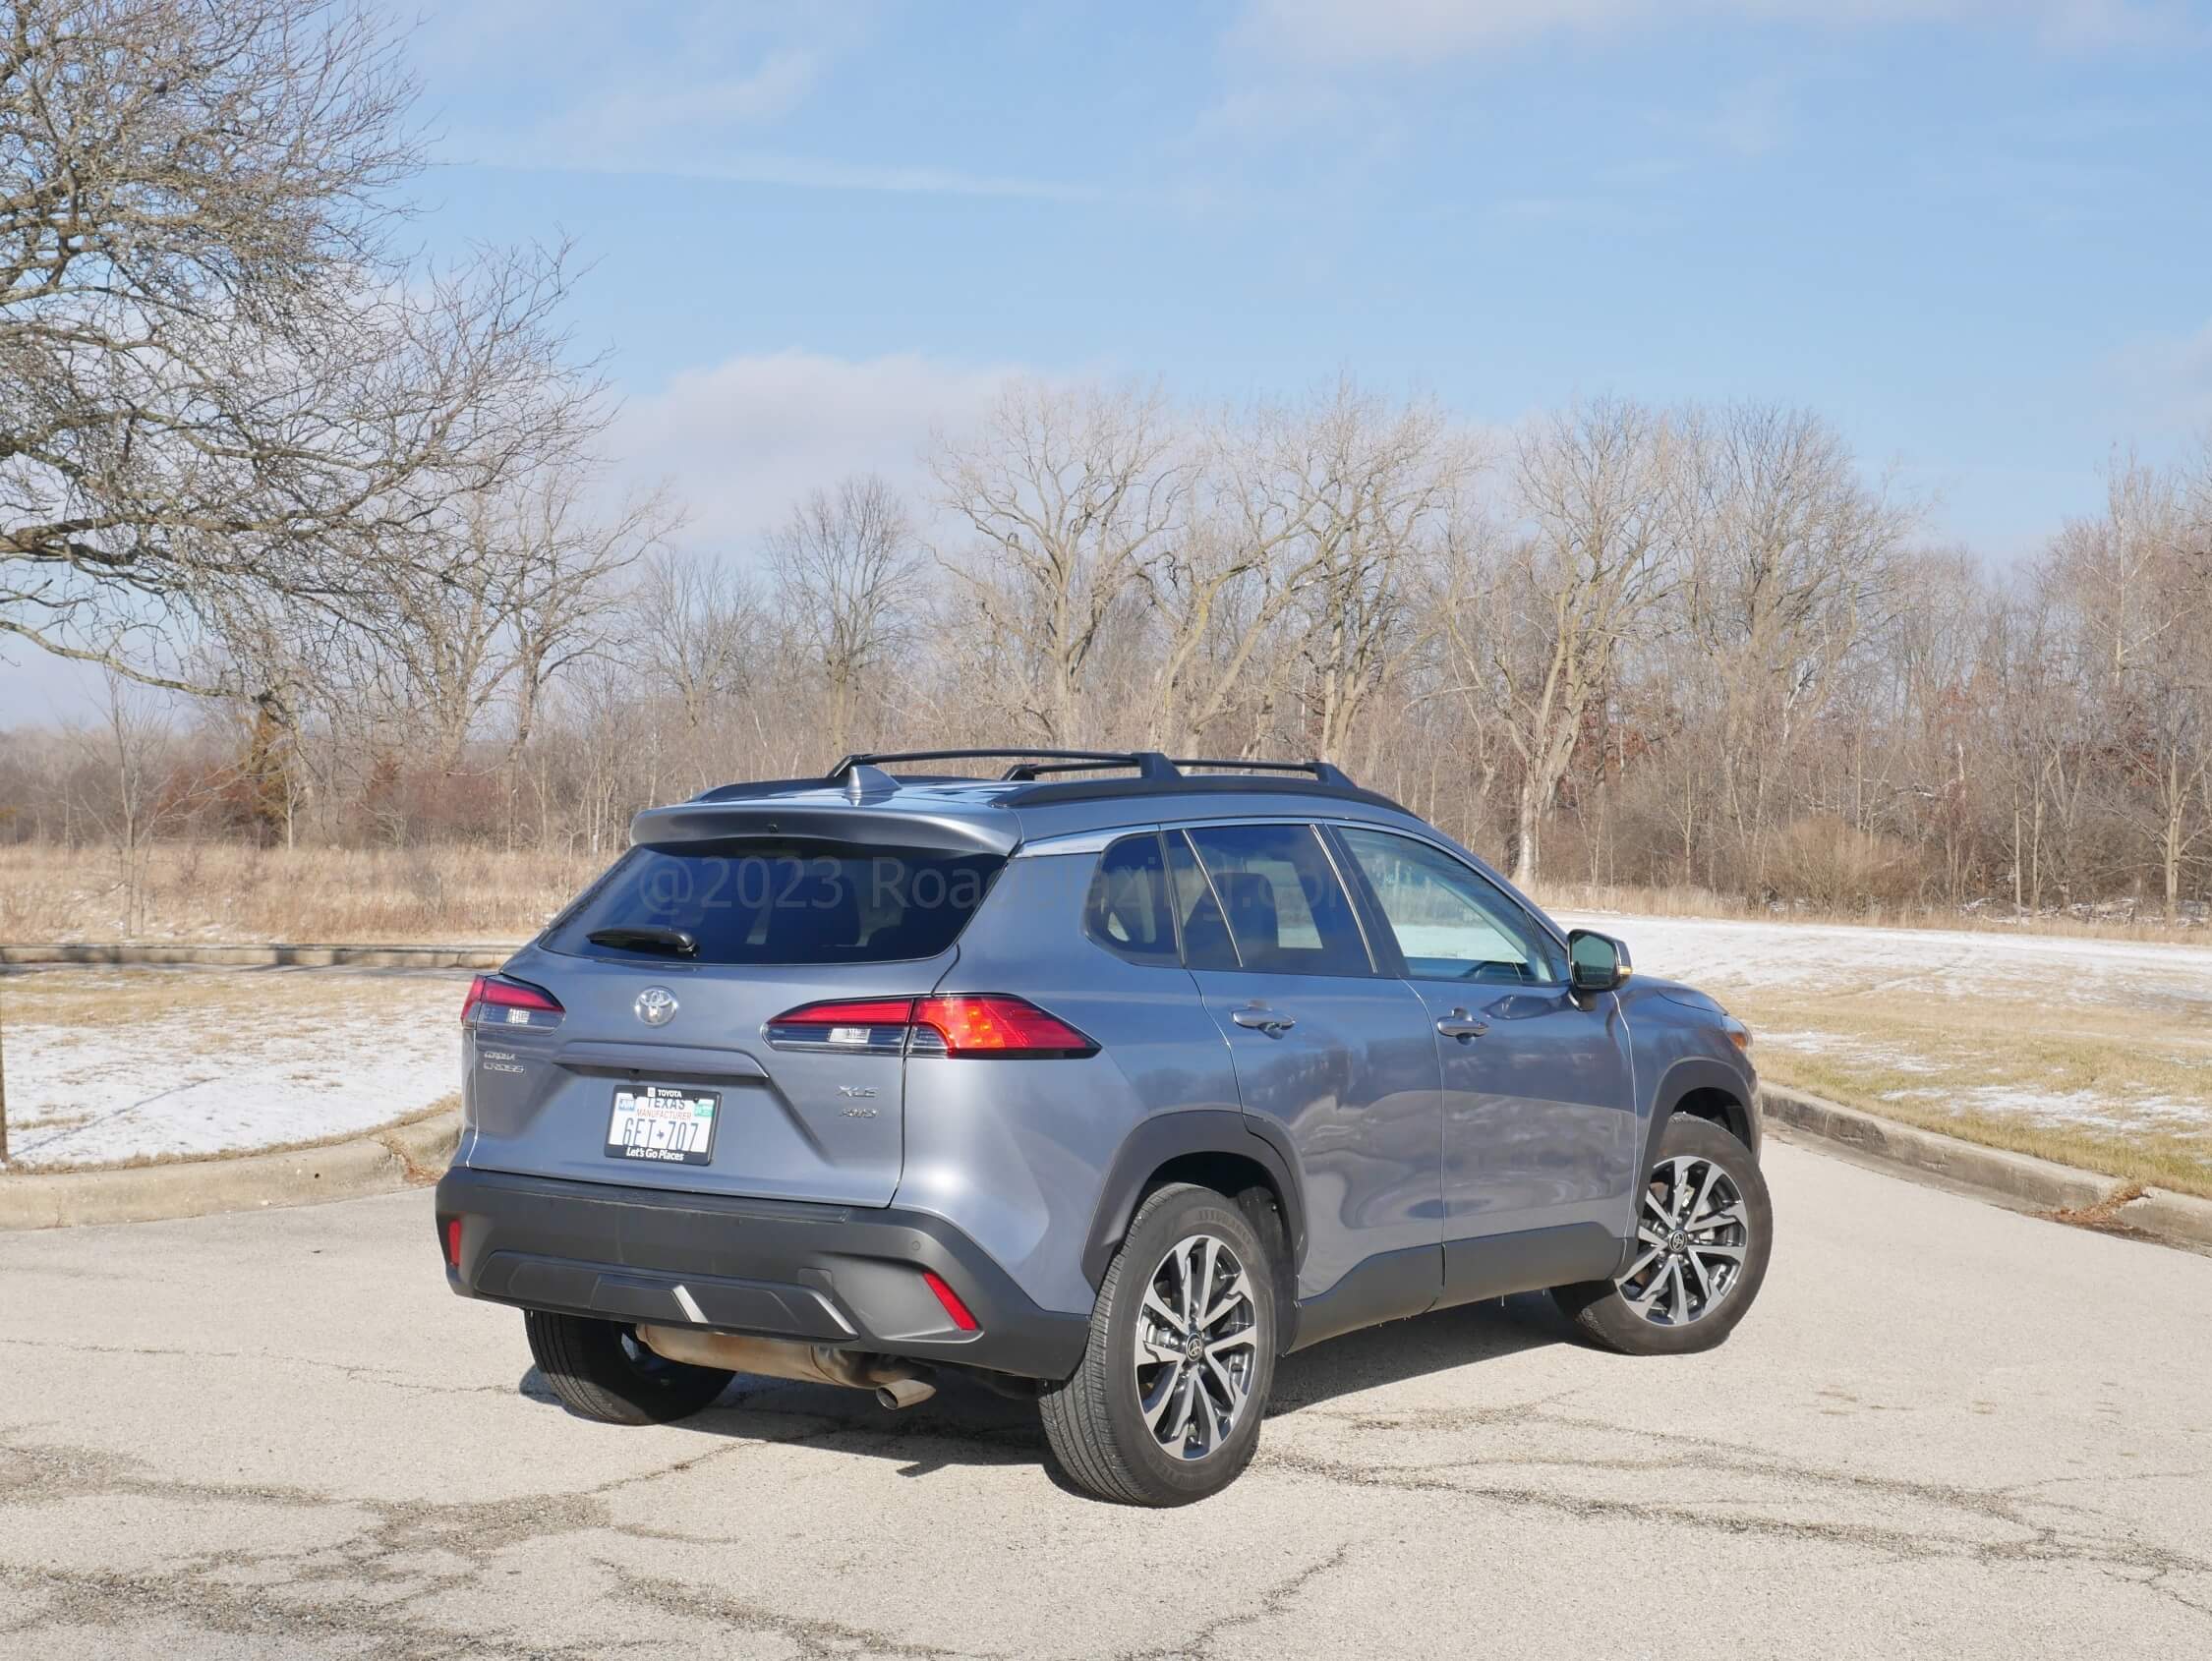 2022 Toyota Corolla Cross XLE AWD: in Celestite Gray, taller than wagon stance speaks to active lifestyle